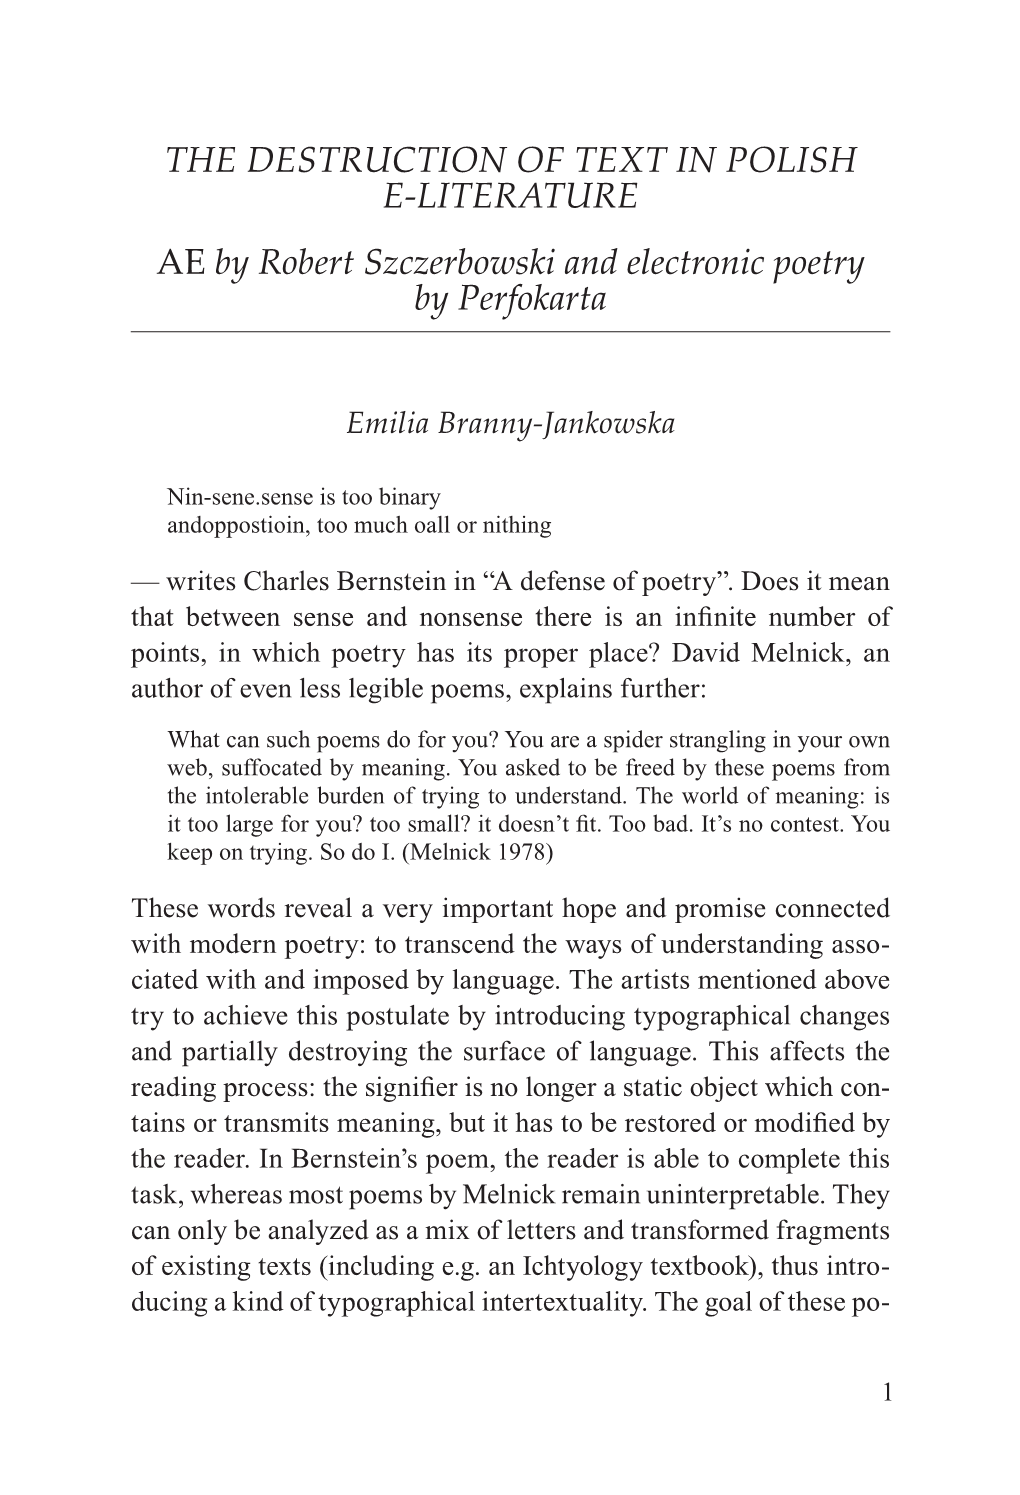 THE DESTRUCTION of TEXT in POLISH E-LITERATURE AE by Robert Szczerbowski and Electronic Poetry by Perfokarta